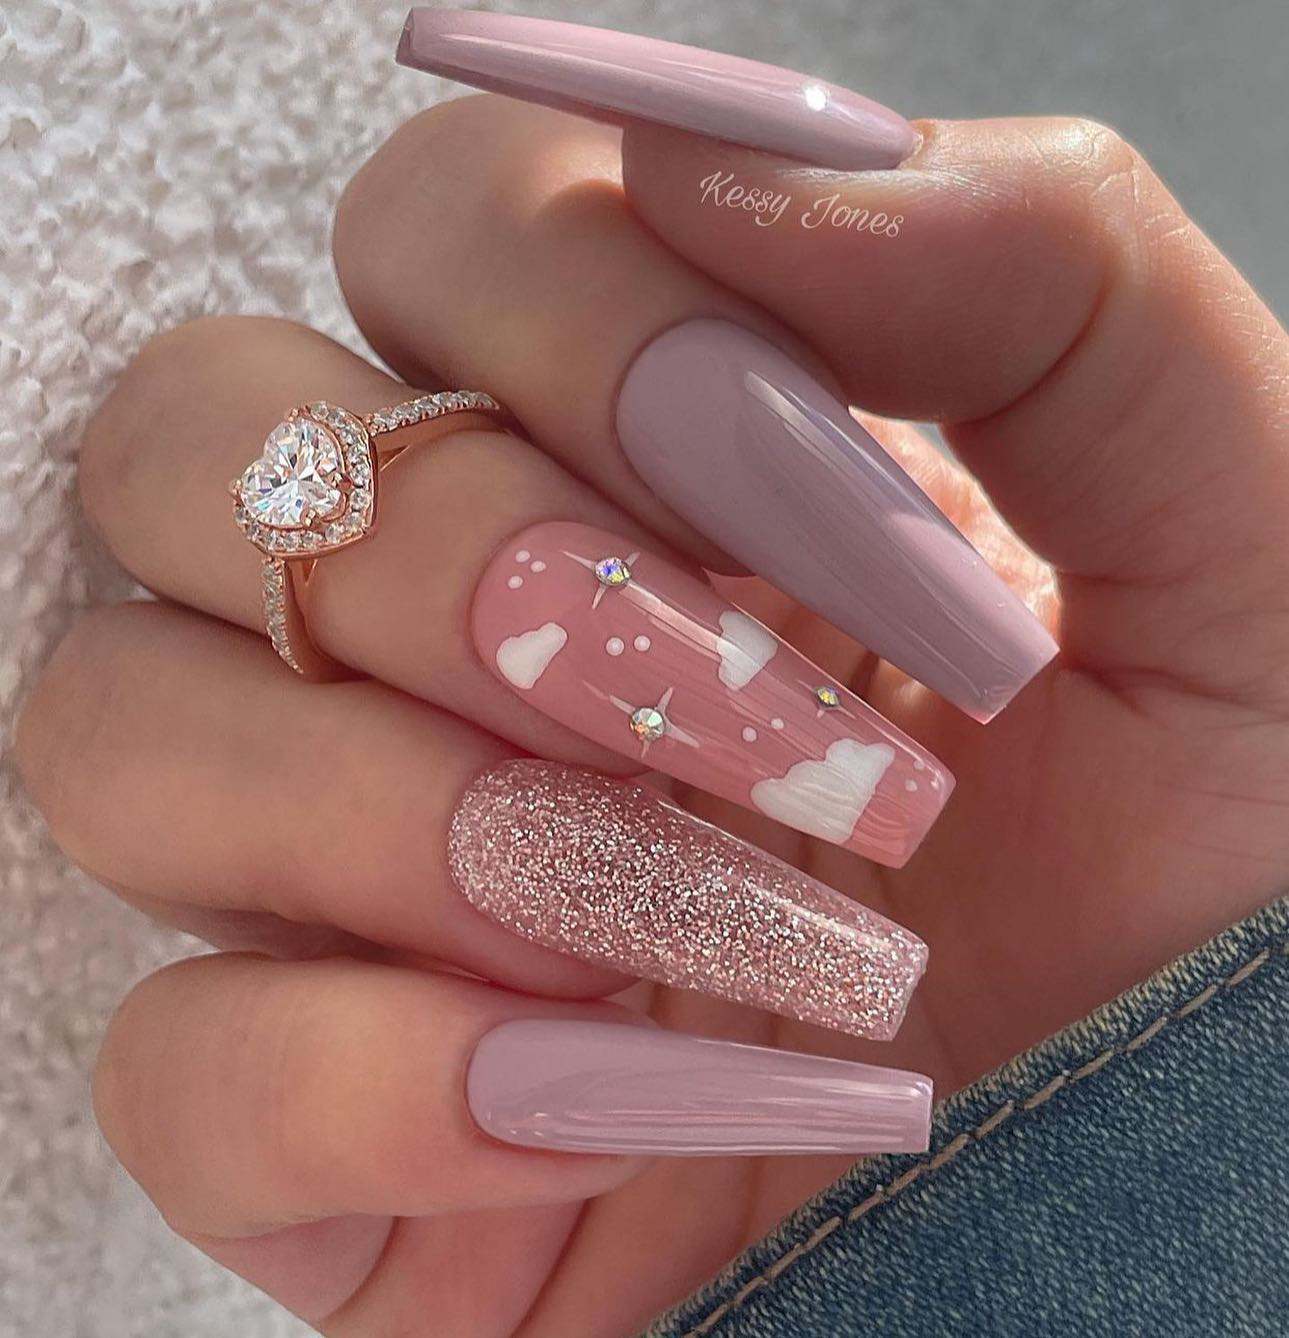 35 Nail Designs For 2022 You’ll Want To Try Immediately images 10